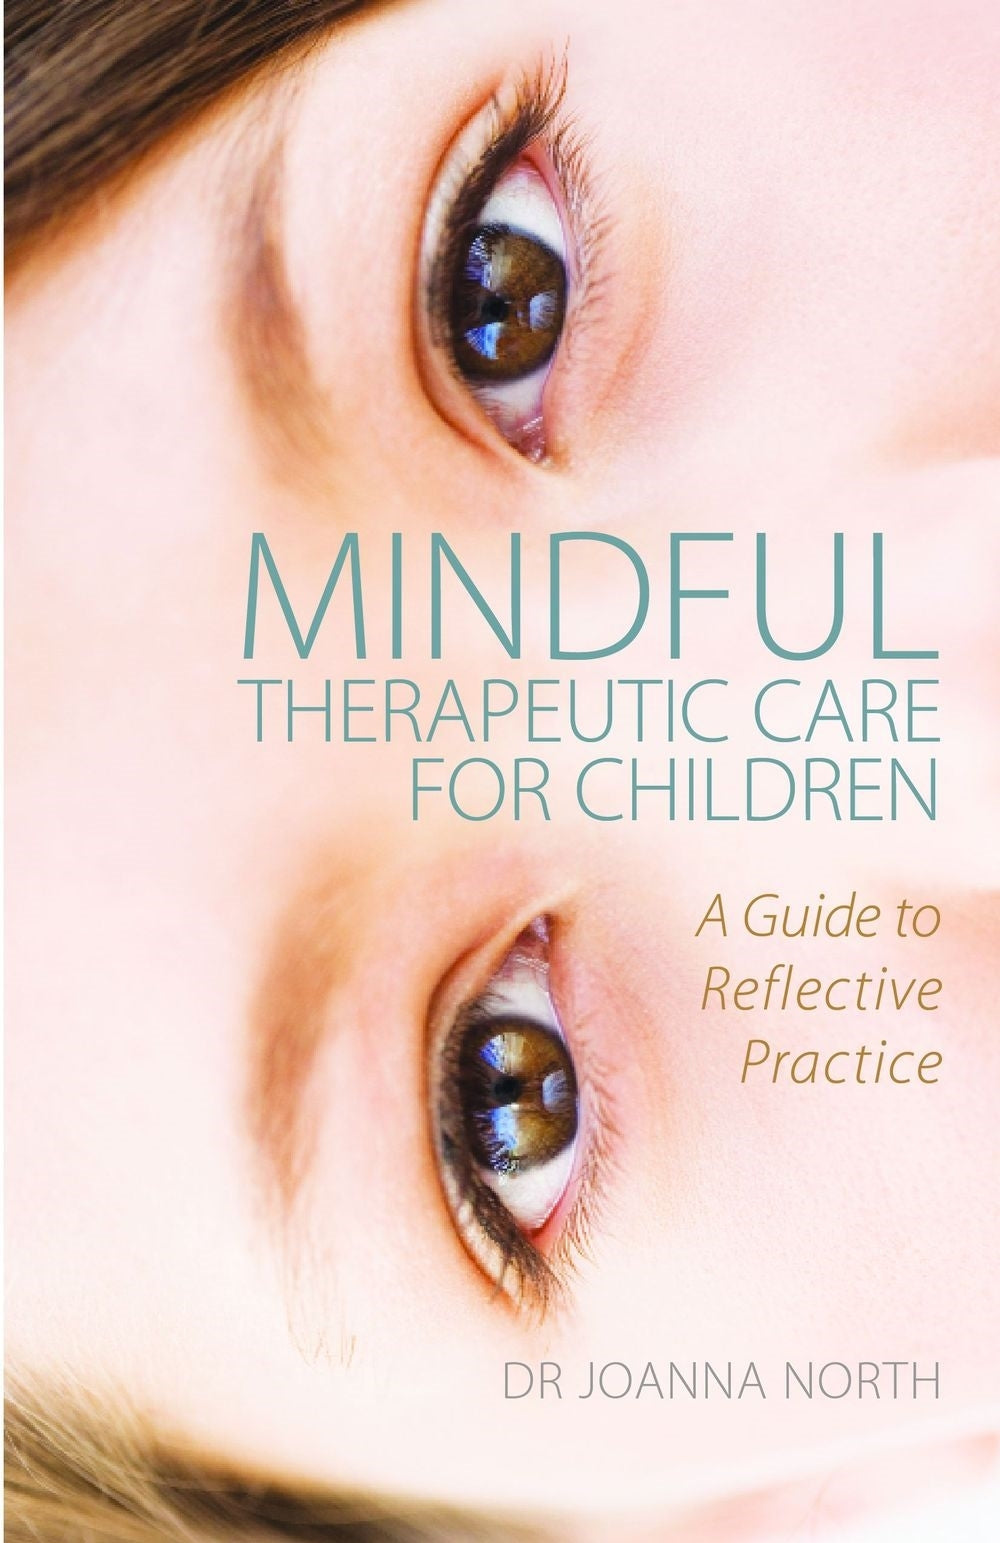 Mindful Therapeutic Care for Children by Joanna North